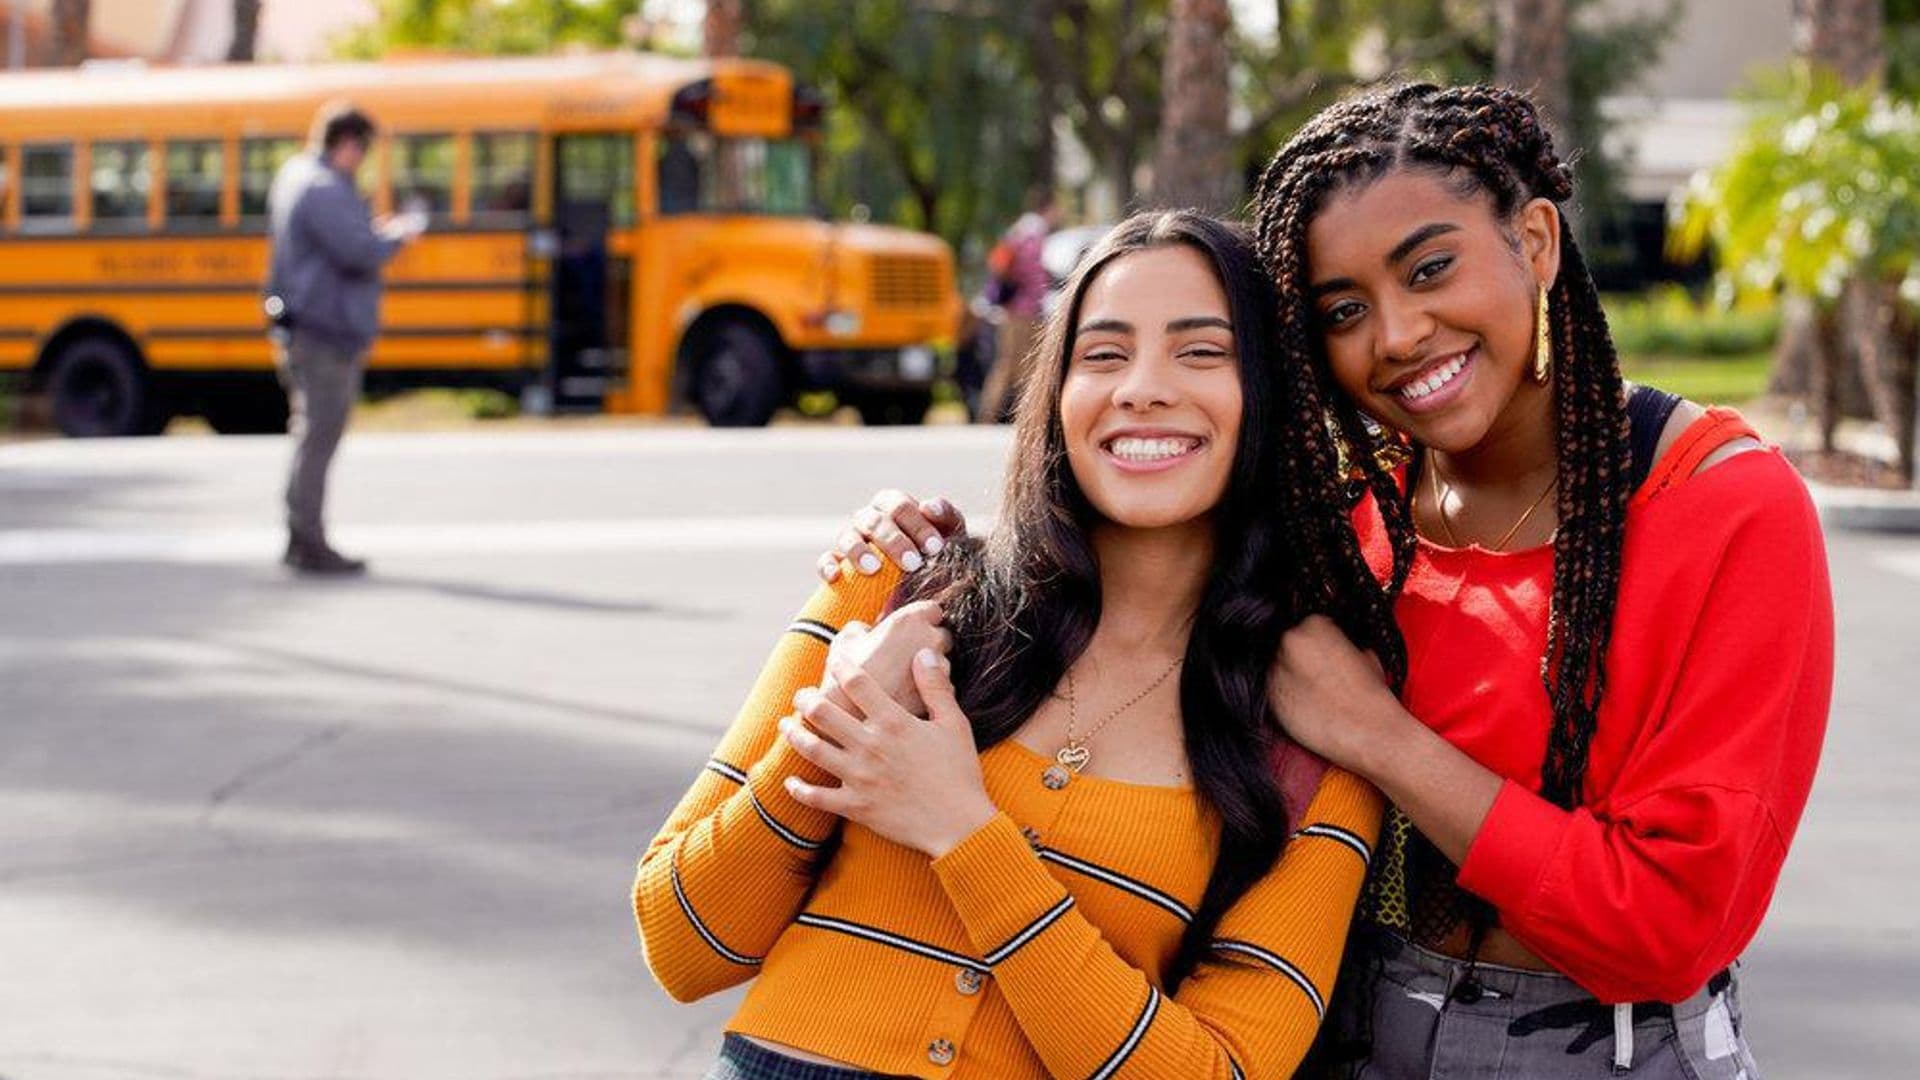 Meet the reinvented ‘Saved By the Bell’ leading Latinx ladies, Haskiri Velazquez, and Alycia Pascual-Peña